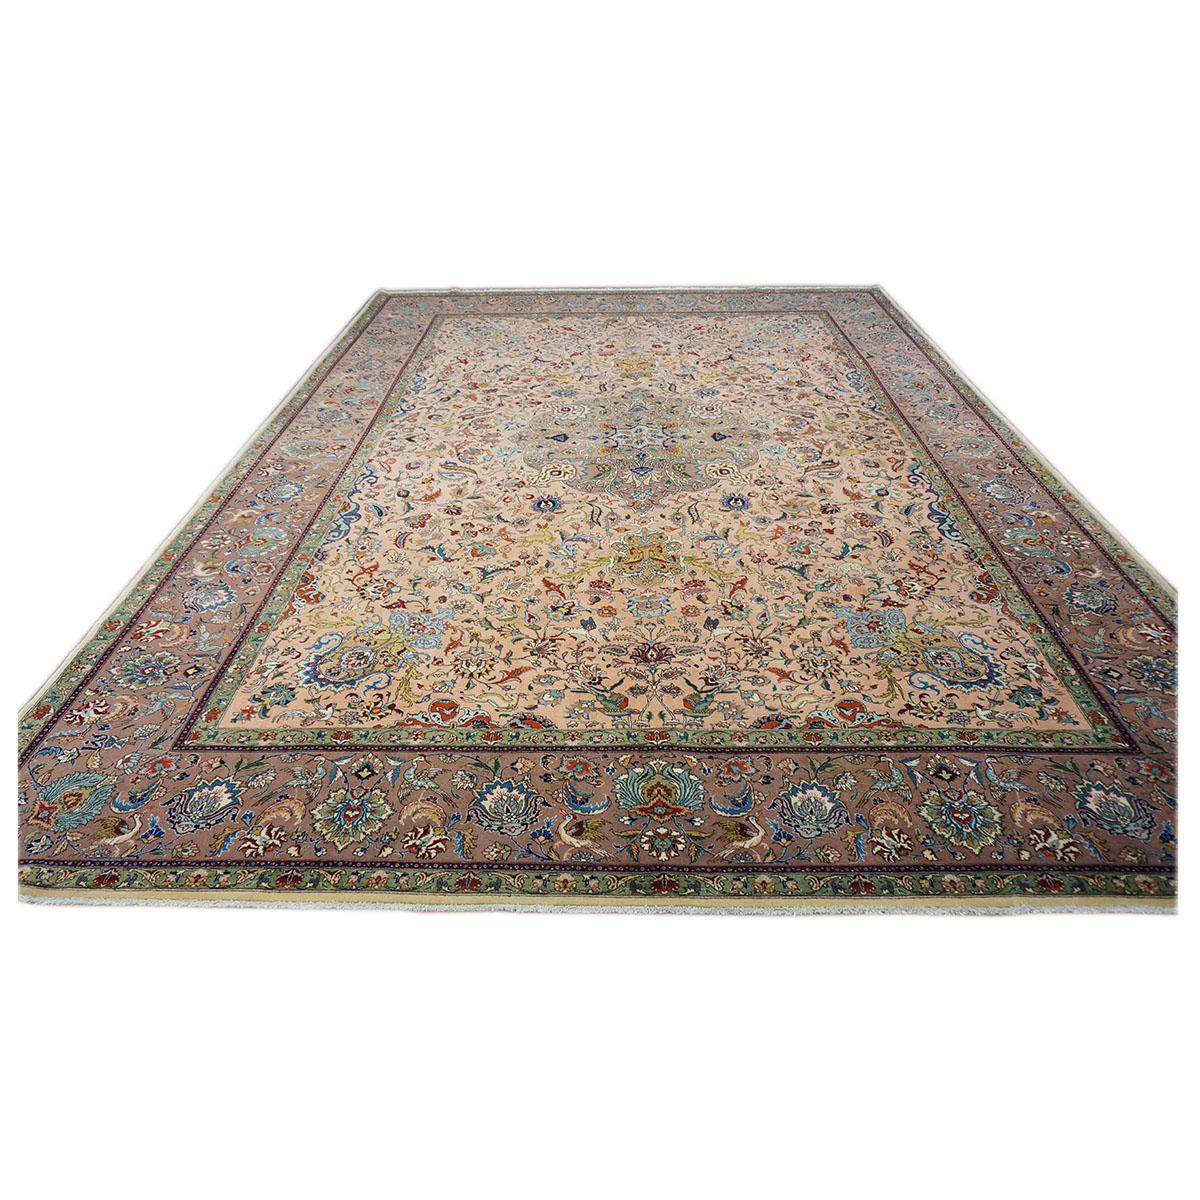 Hand-Woven Antique 1930s Persian Tabriz Pahlavi 9X13 Salmon Pink & Nutmeg Brown Area Rug For Sale